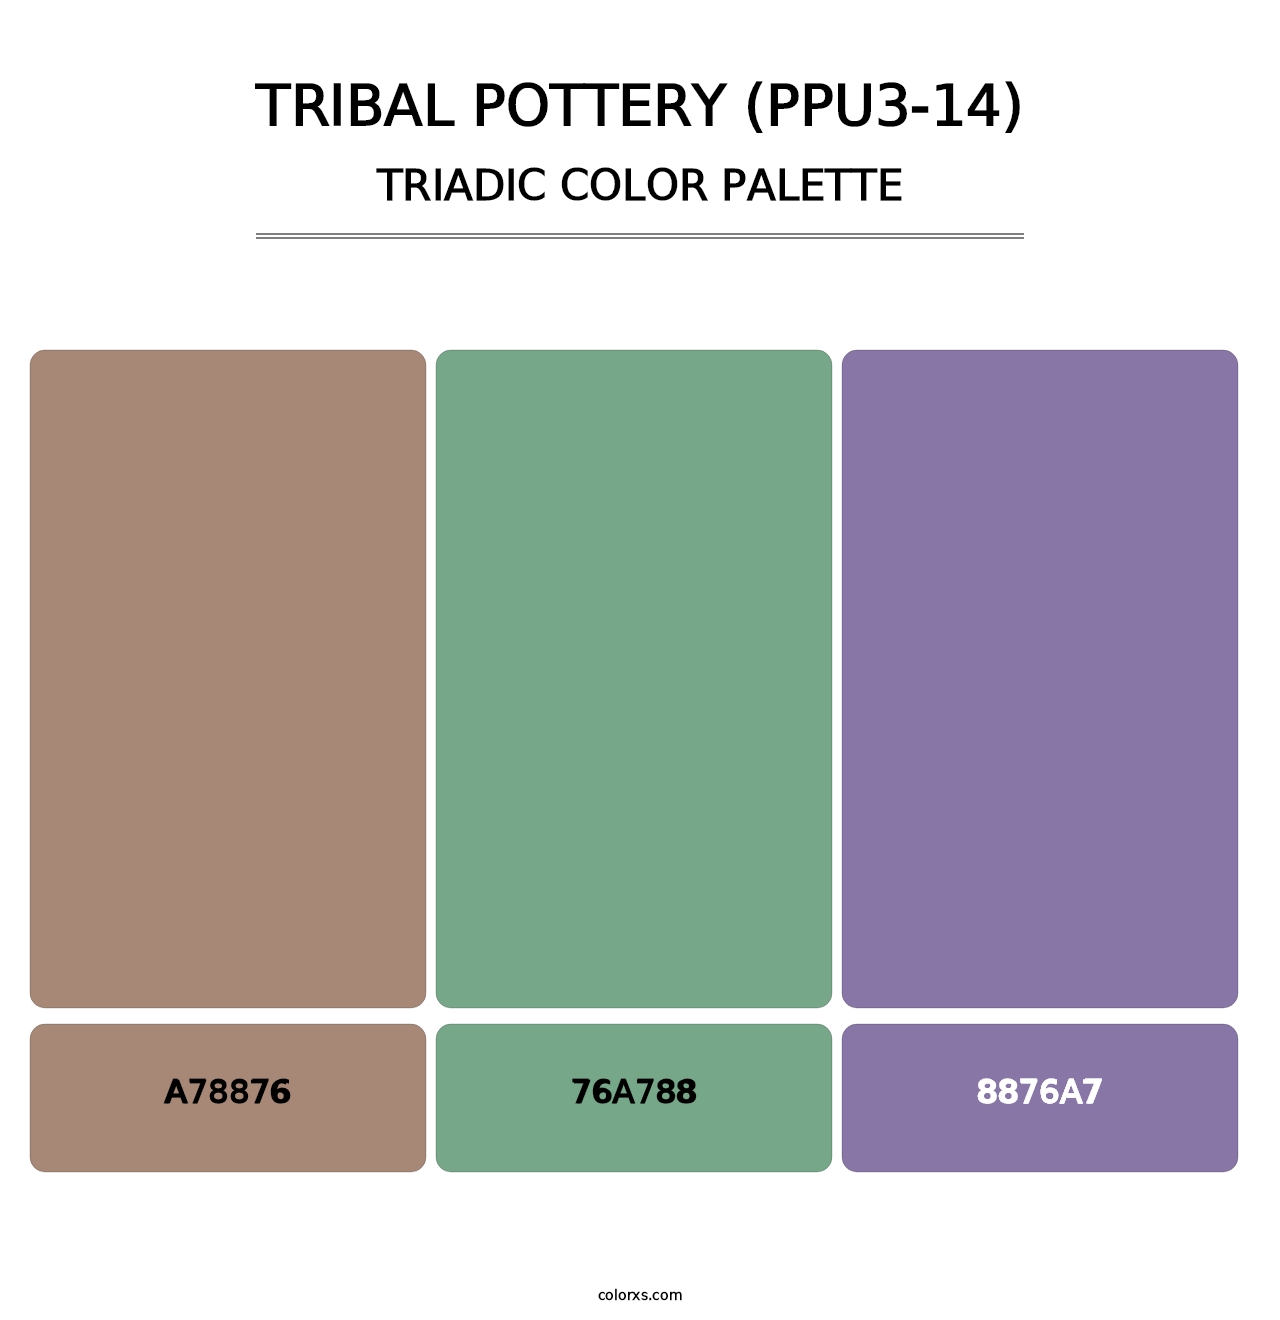 Tribal Pottery (PPU3-14) - Triadic Color Palette